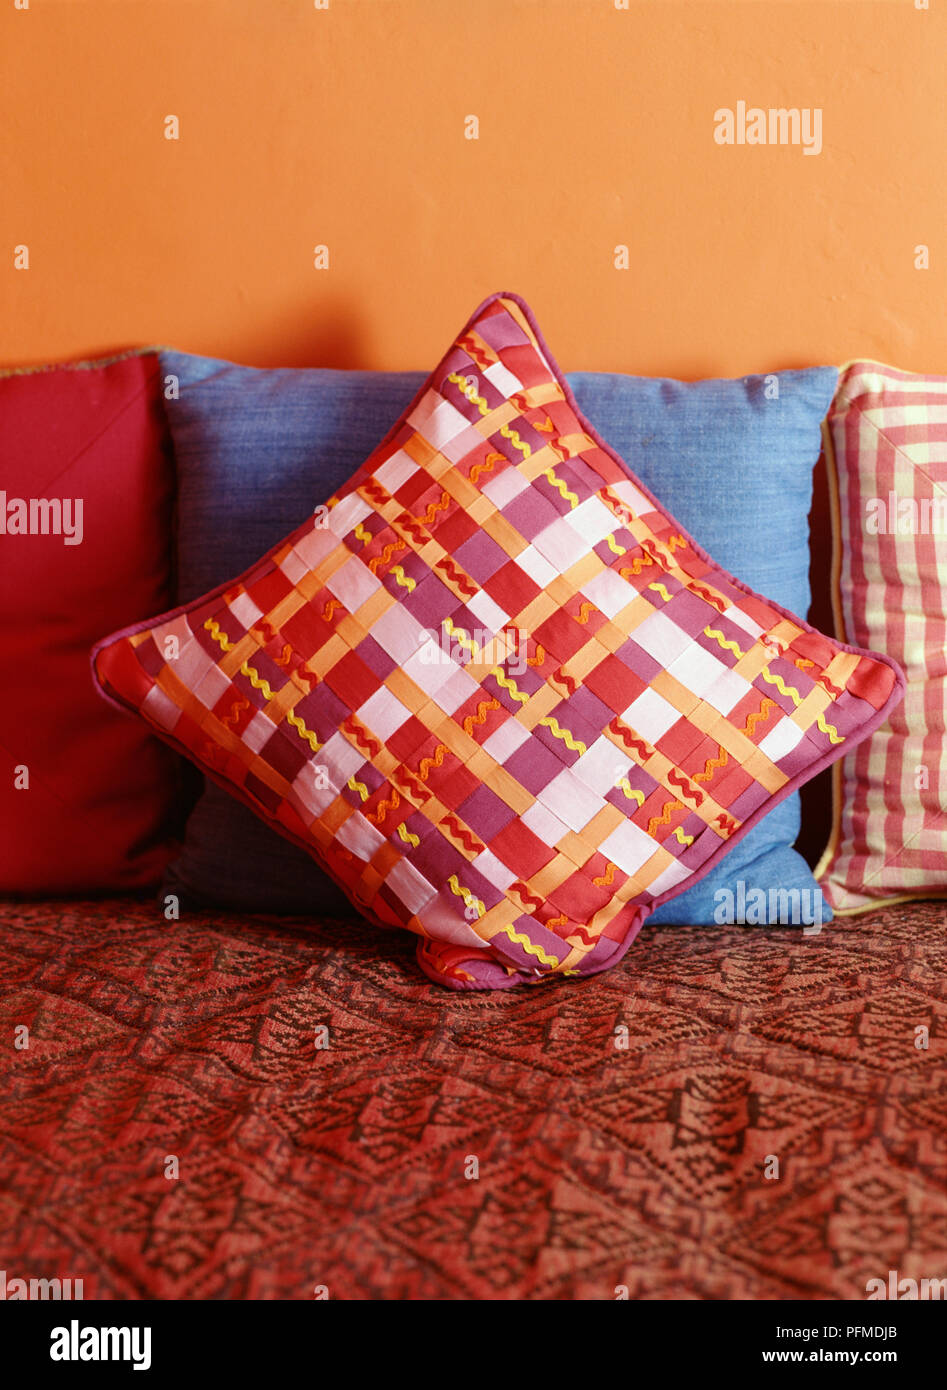 Colourful cushions scattered on red sofa, pink, red and white cushion with woven ribbon cover at front, blue cushion behind, yellow wall in background. Stock Photo